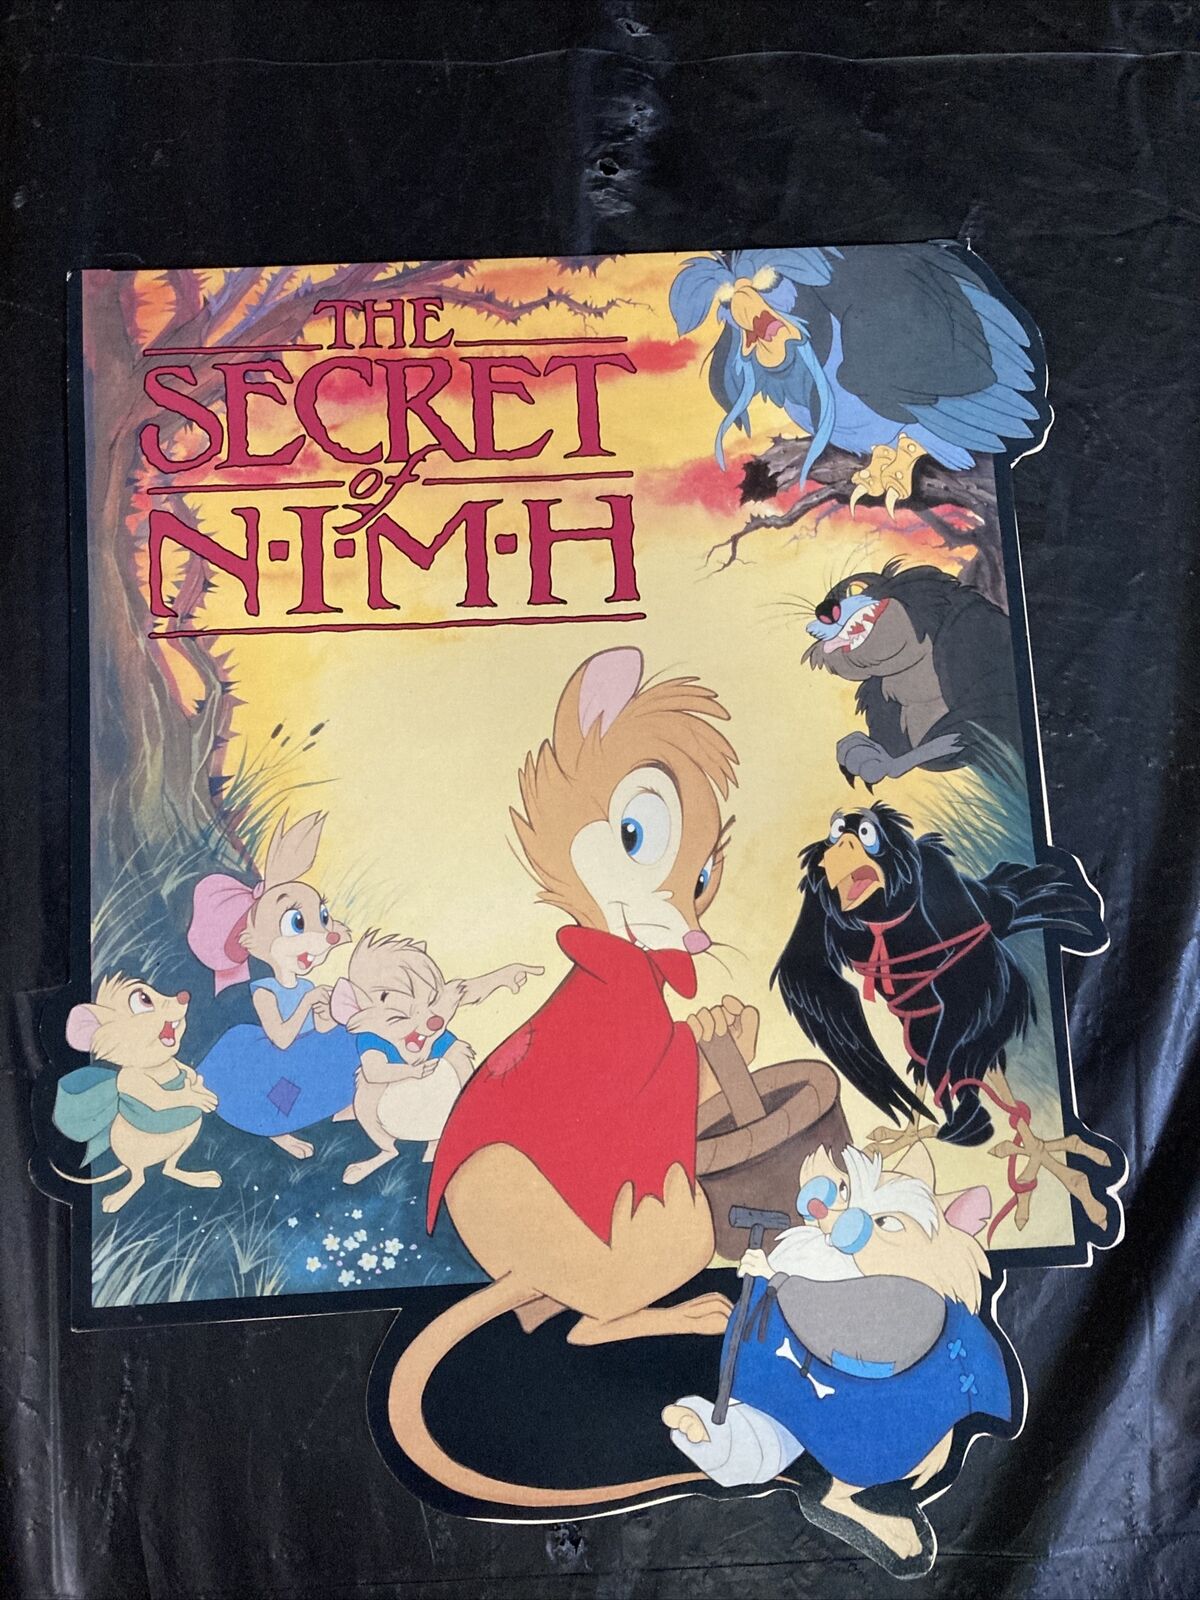 The Secret Of Nimh Video Store Display 1983 9 3/8x11 3/4